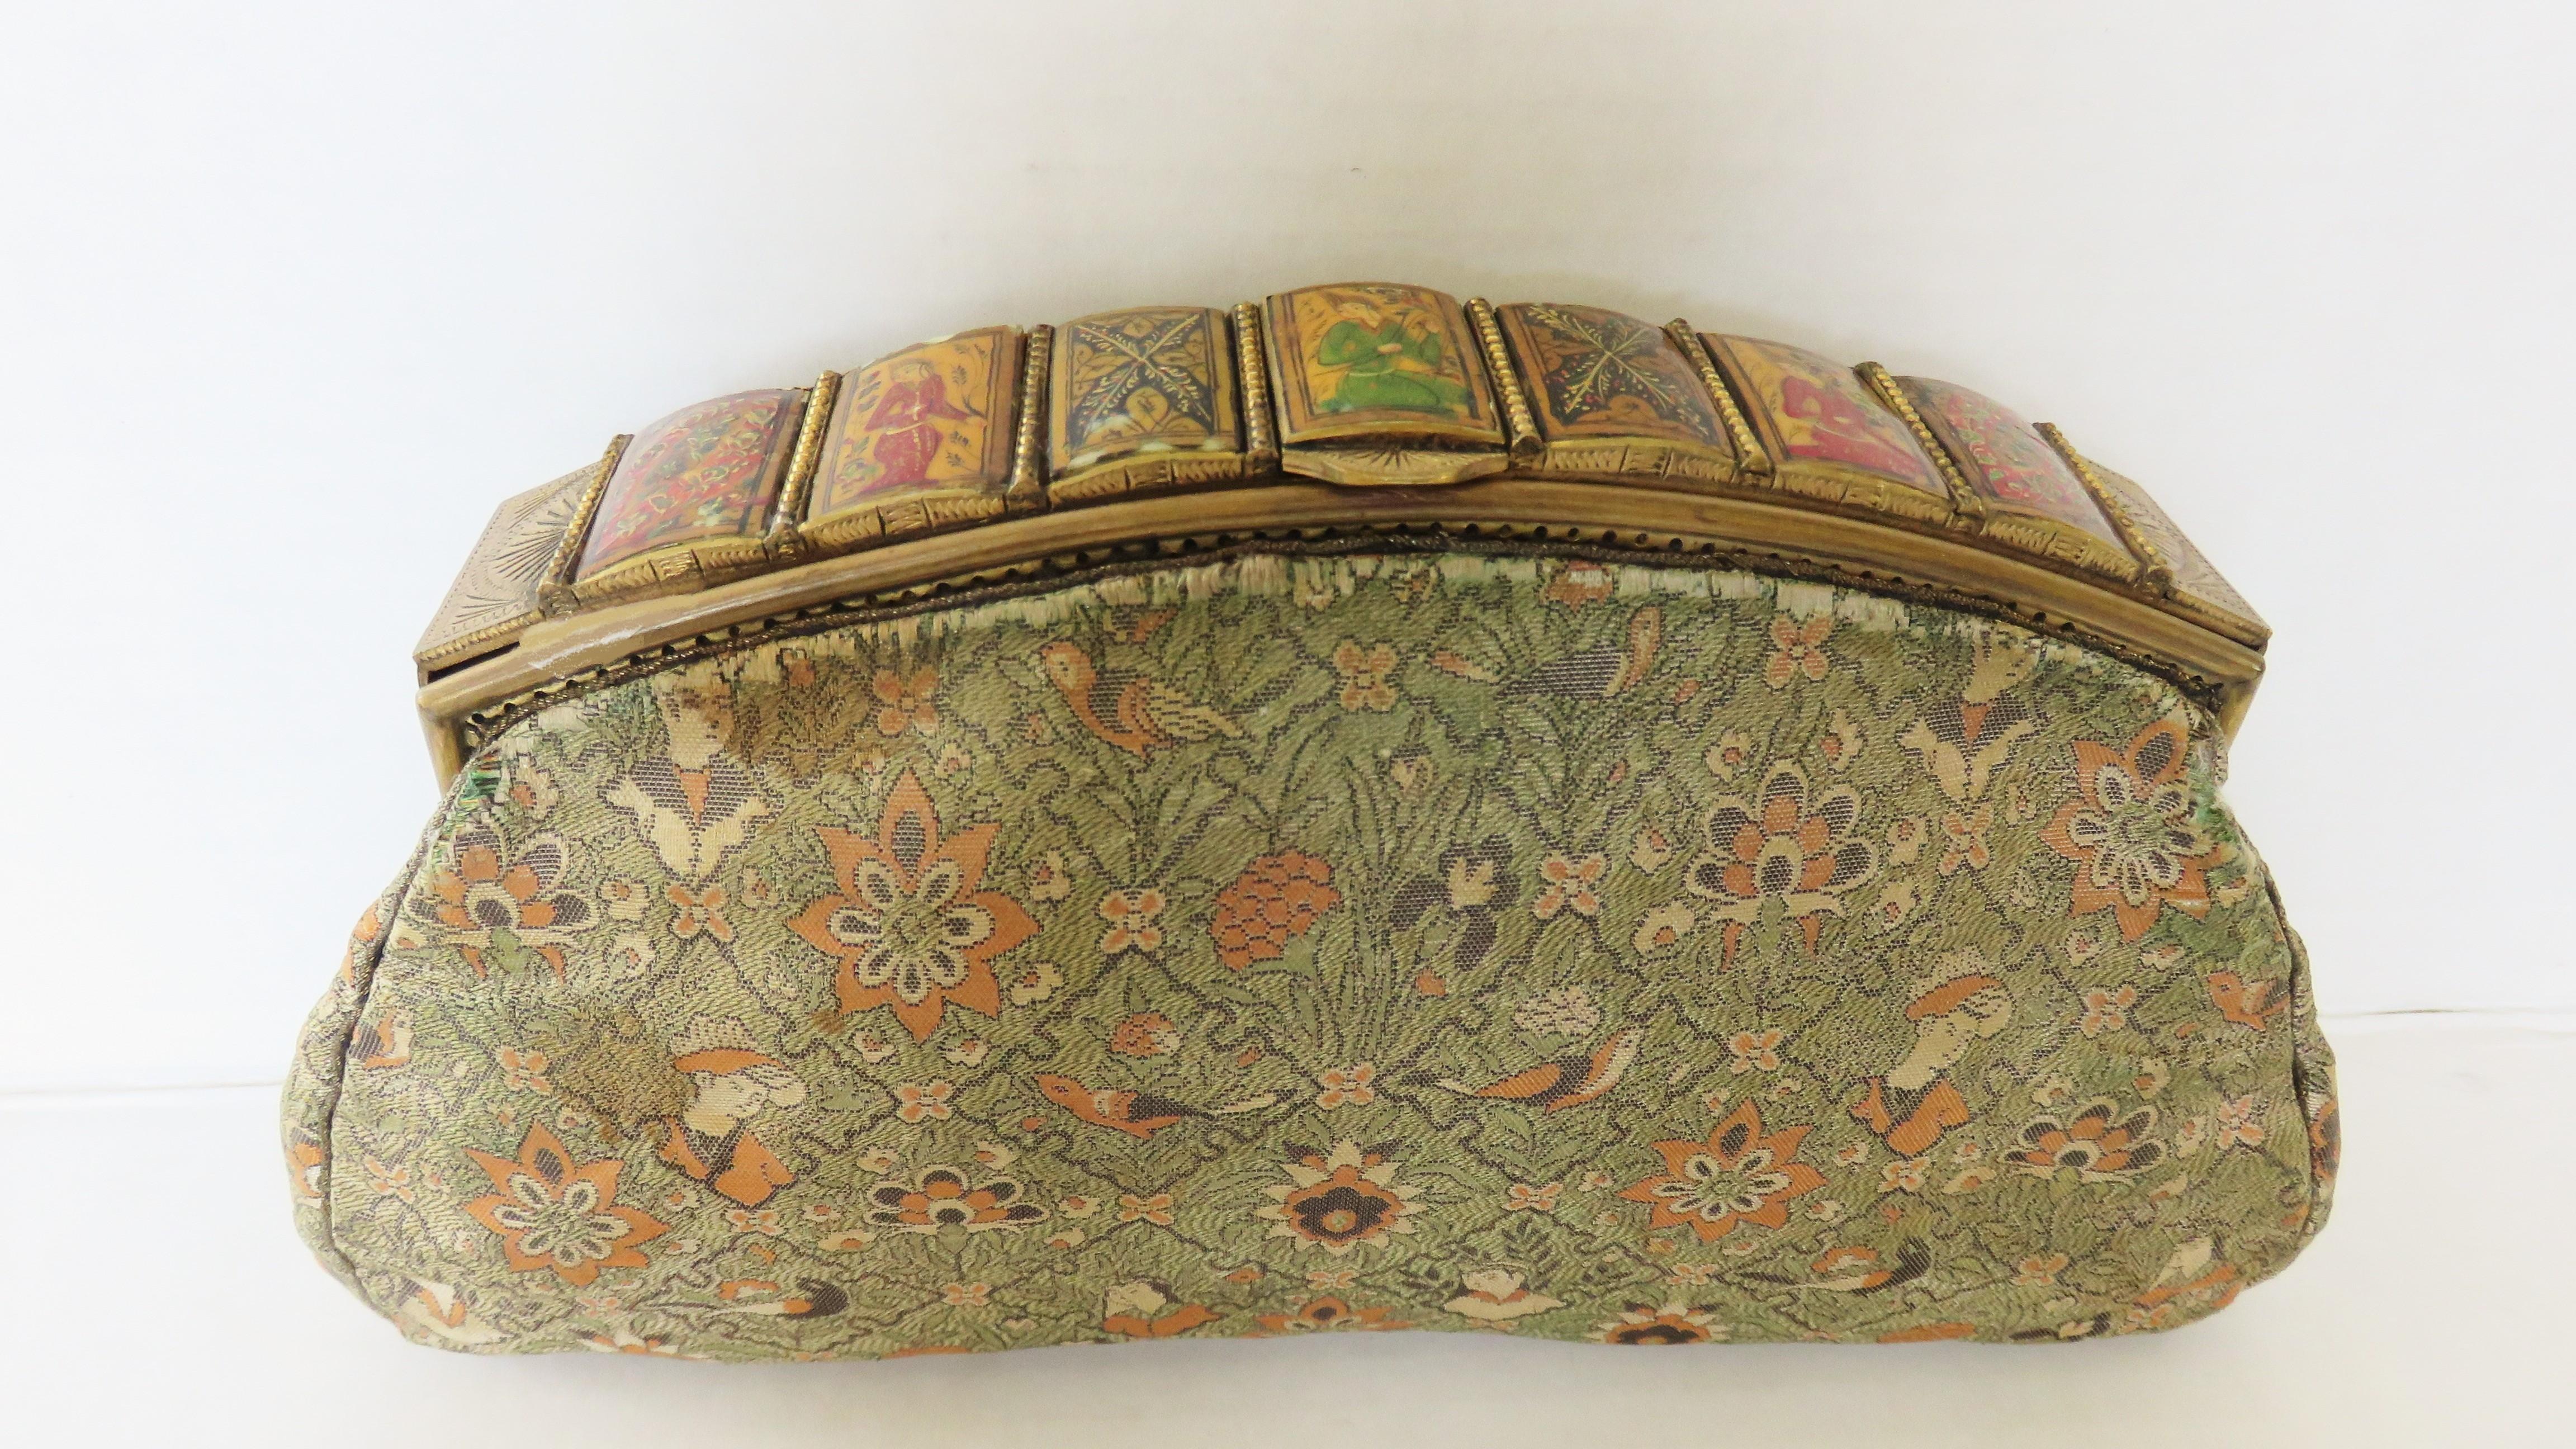 Brown Asian Figure Motif Brocade Clutch with Painted Figures Tile Top 1930s For Sale